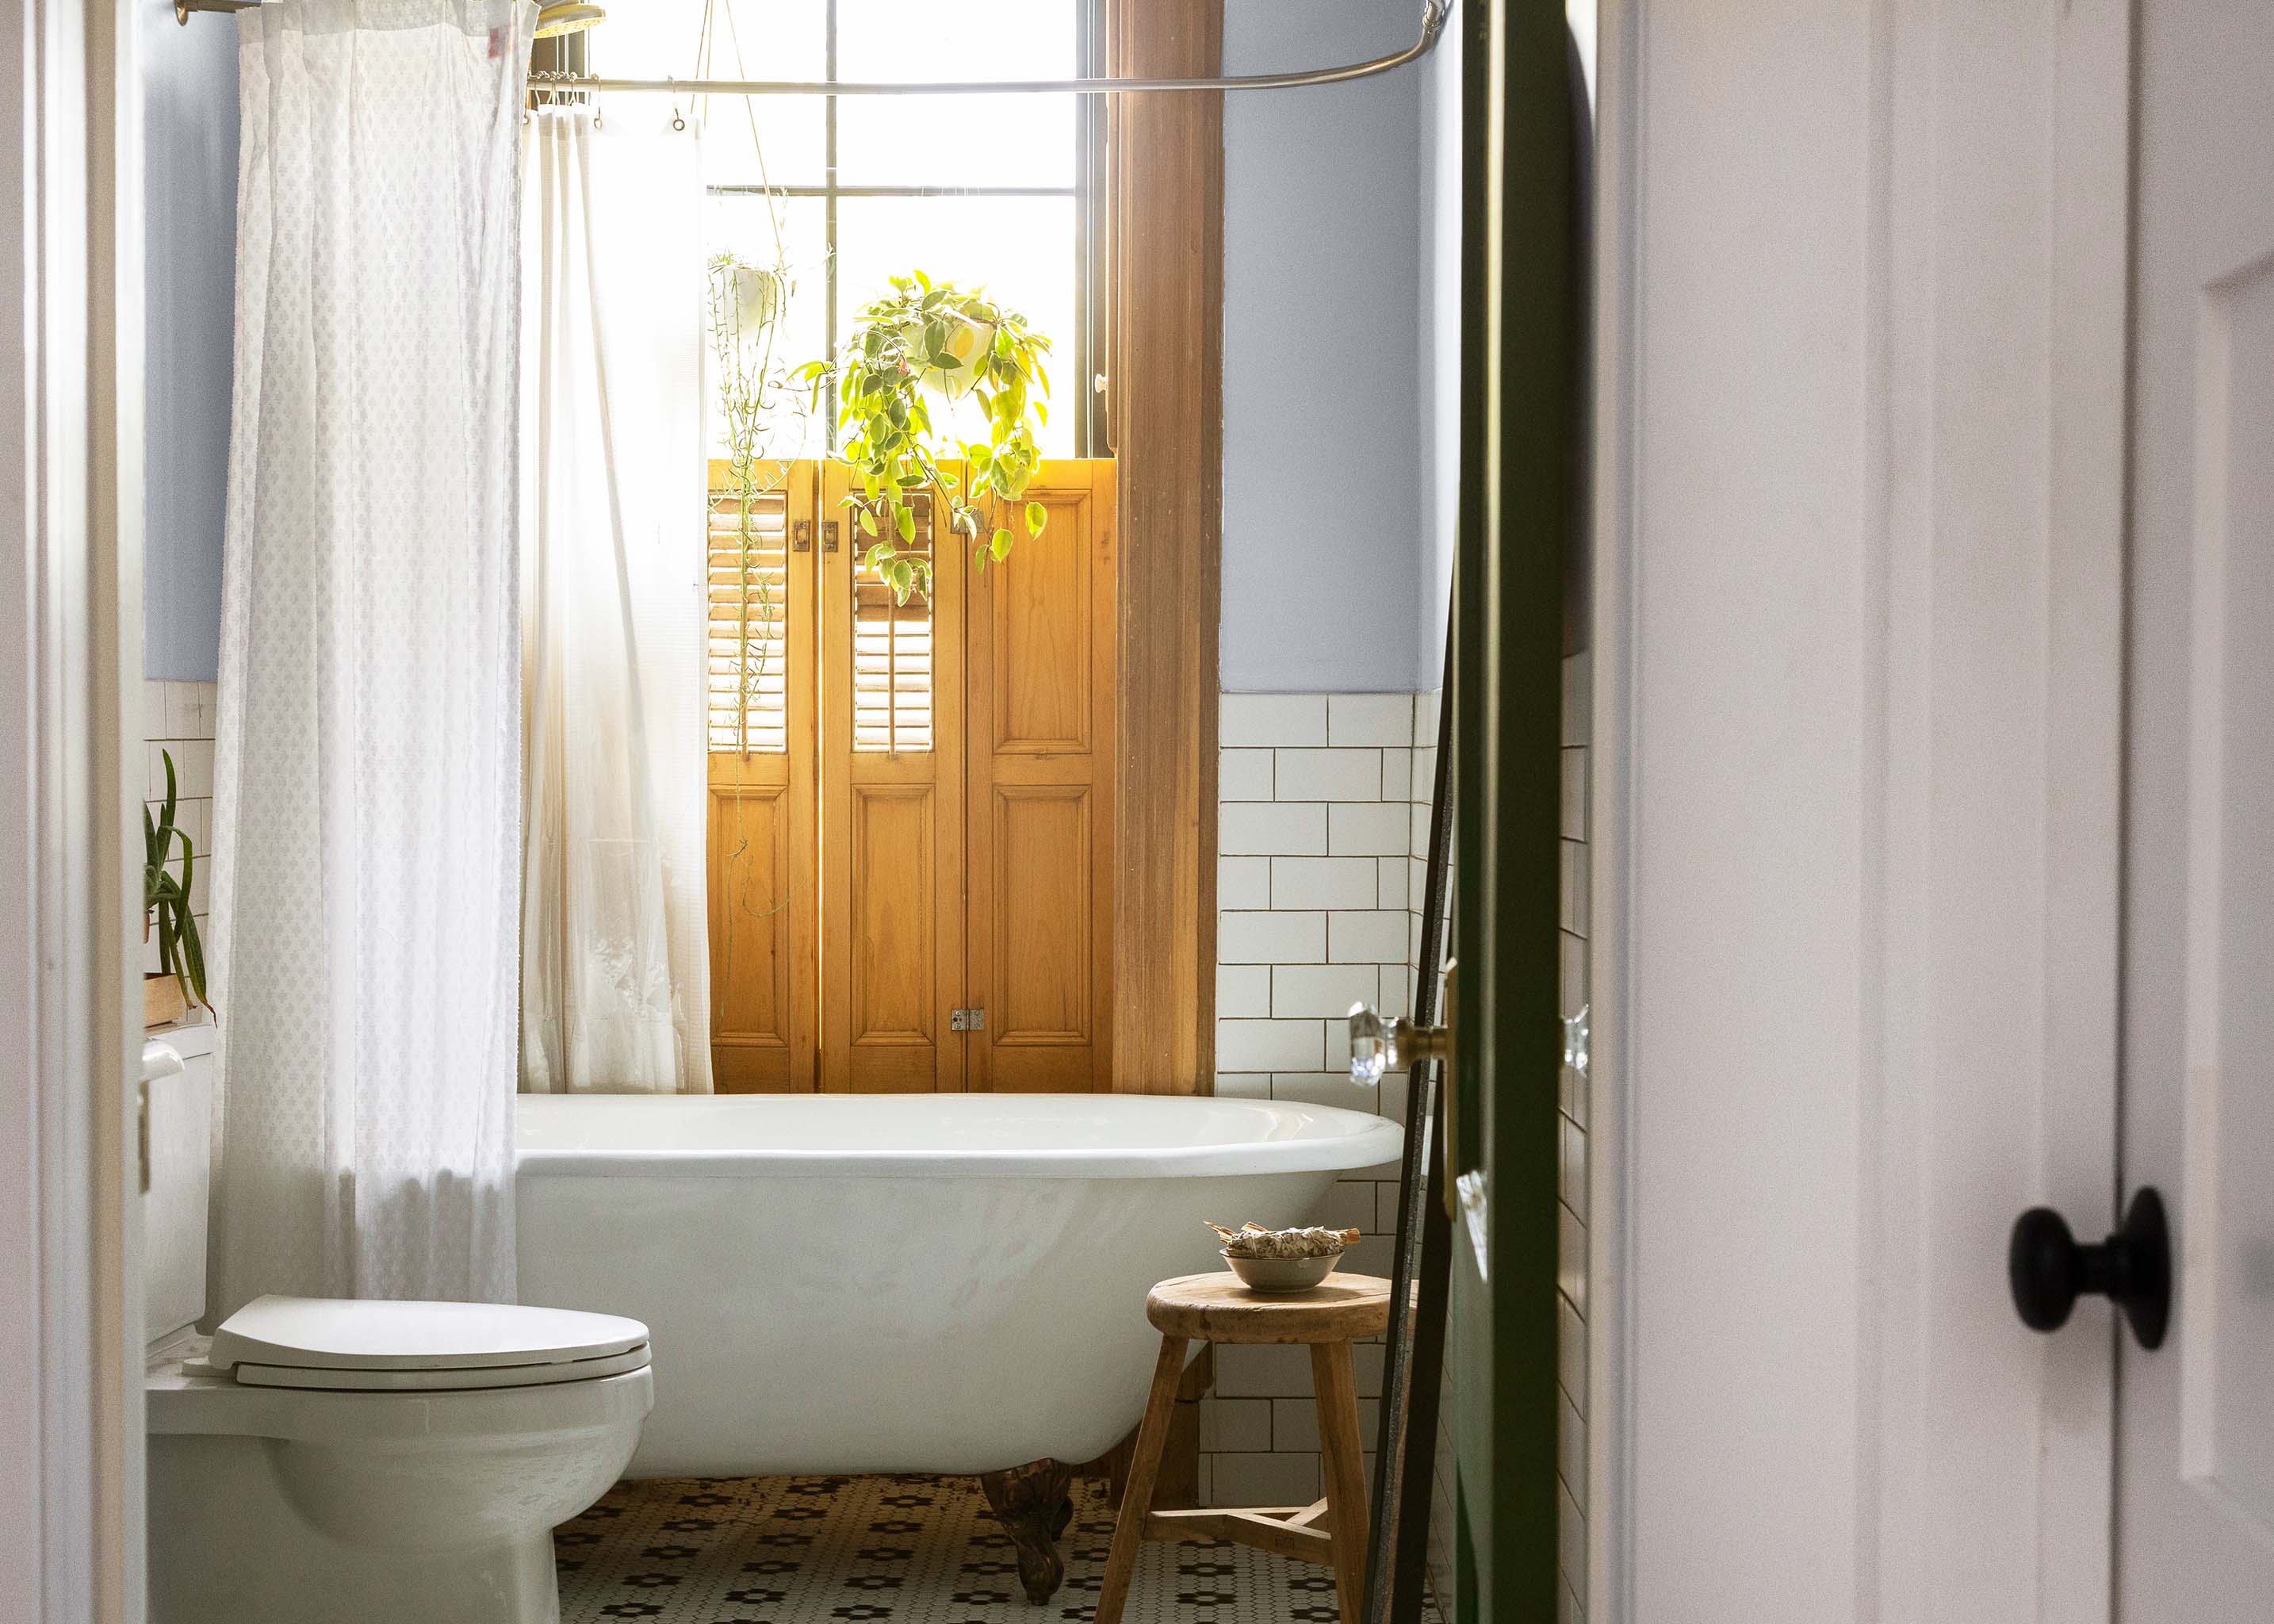 Old-school touches and a fun color for this bathroom make it memorable space.